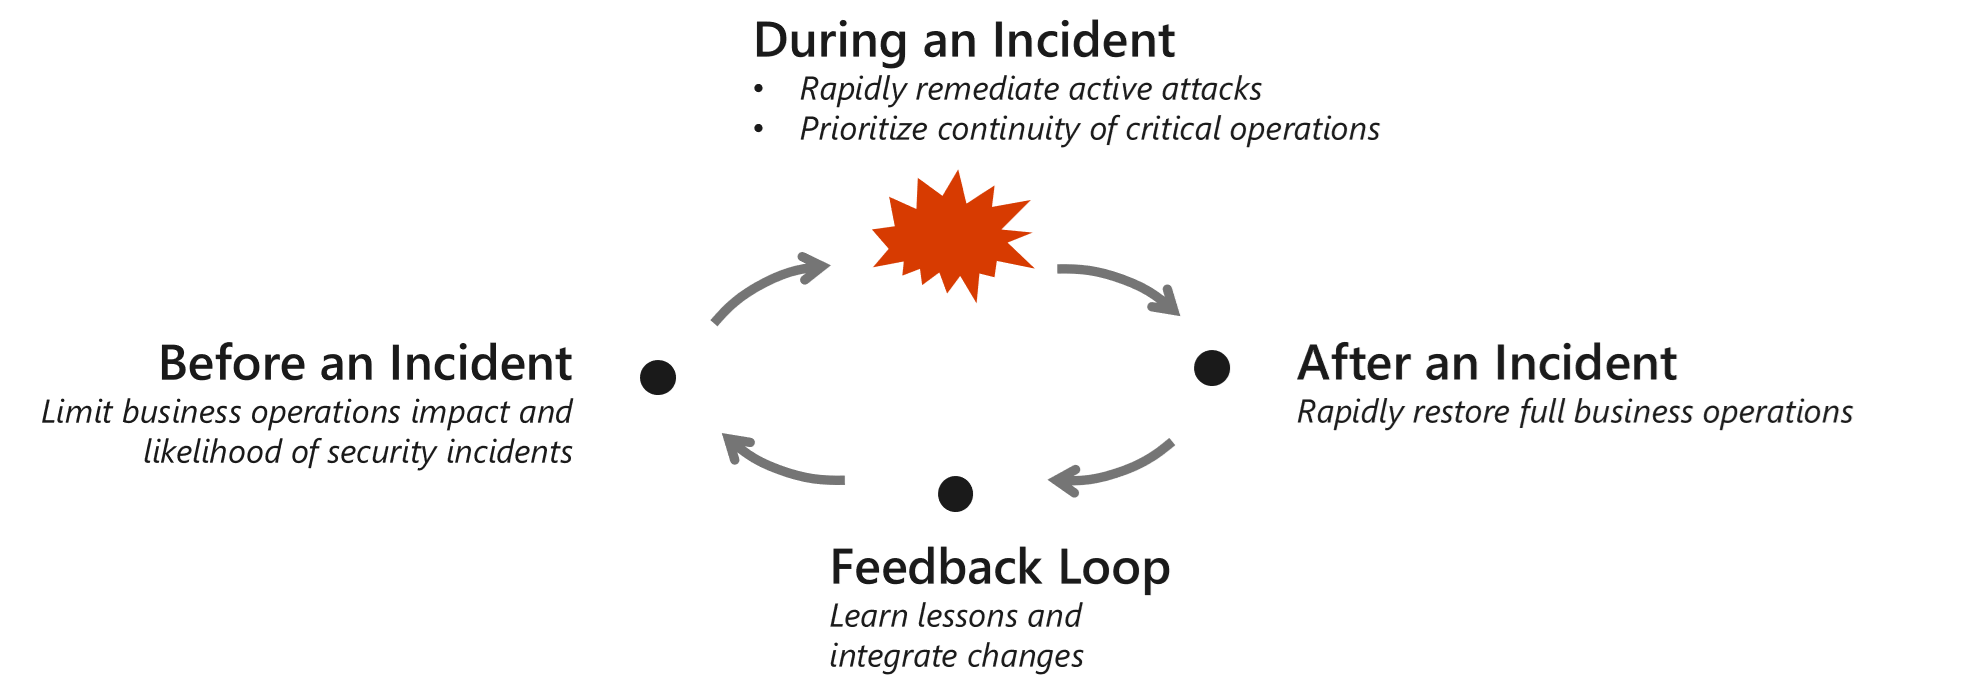 Visual chart depicting the four stages of the life cycle of an incident: Before, during, and after an incident and the lessons learned. 